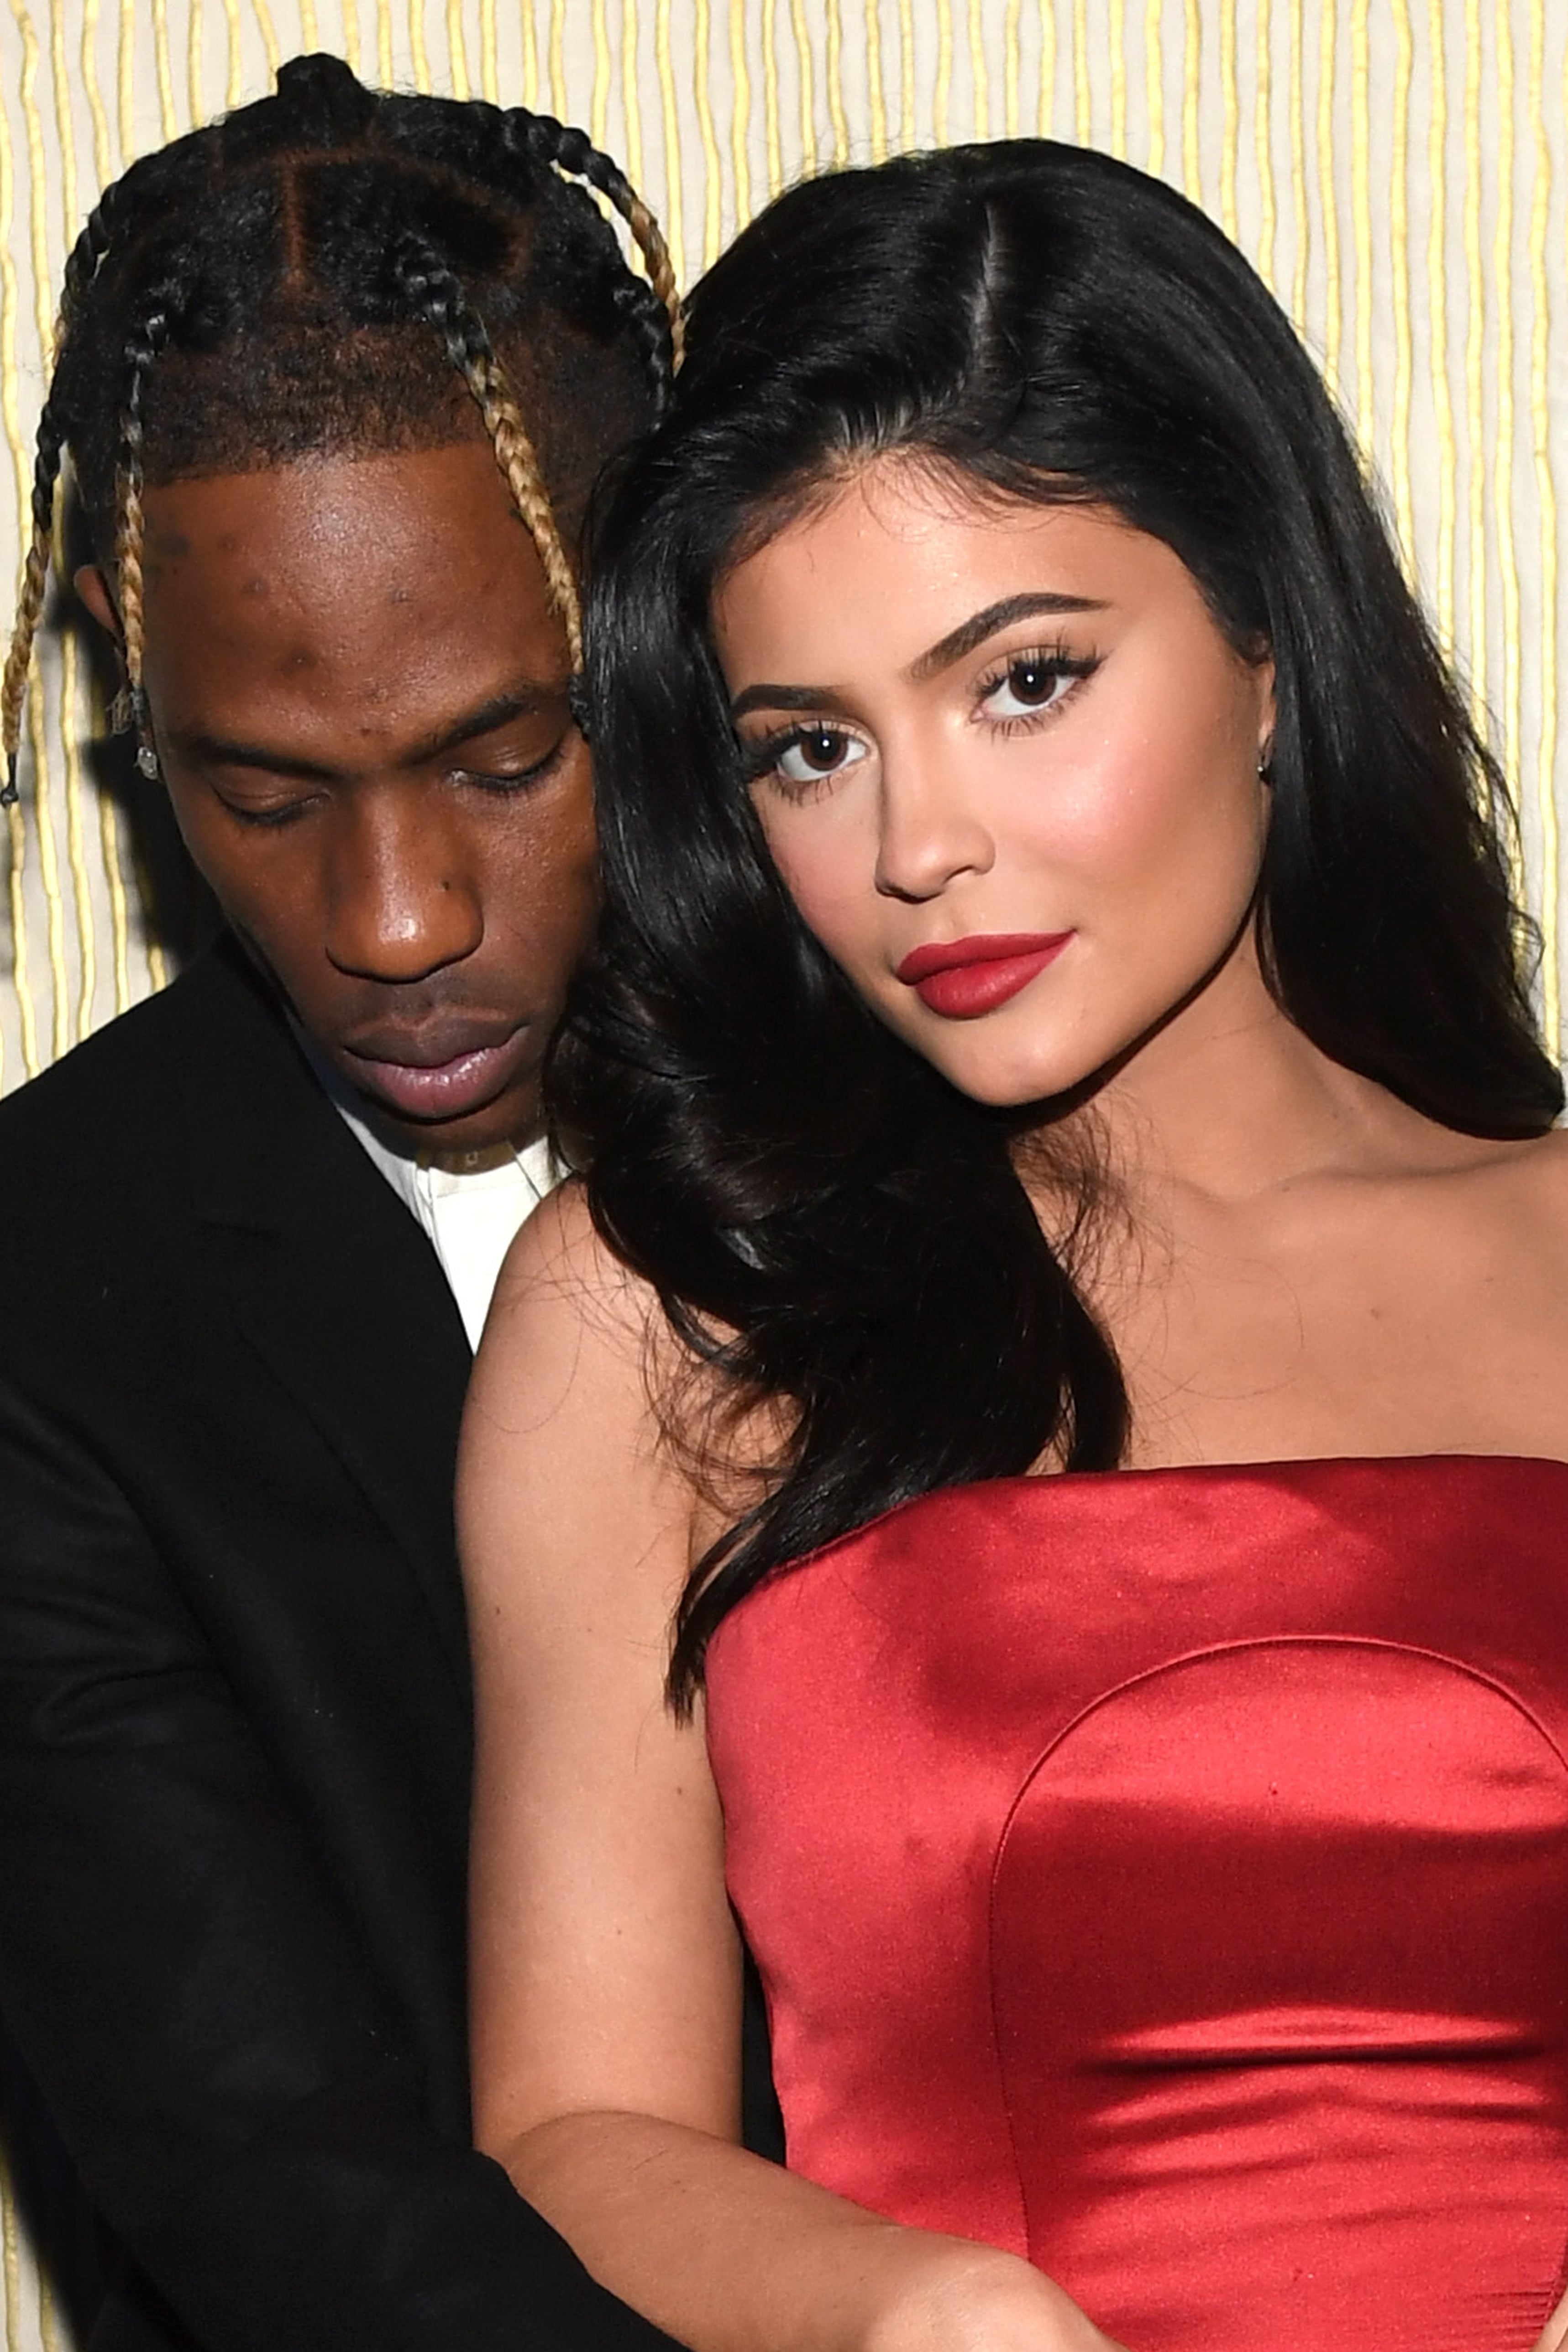 Kylie Jenner Poses in Ex Travis Scott's Newly Released Sneakers